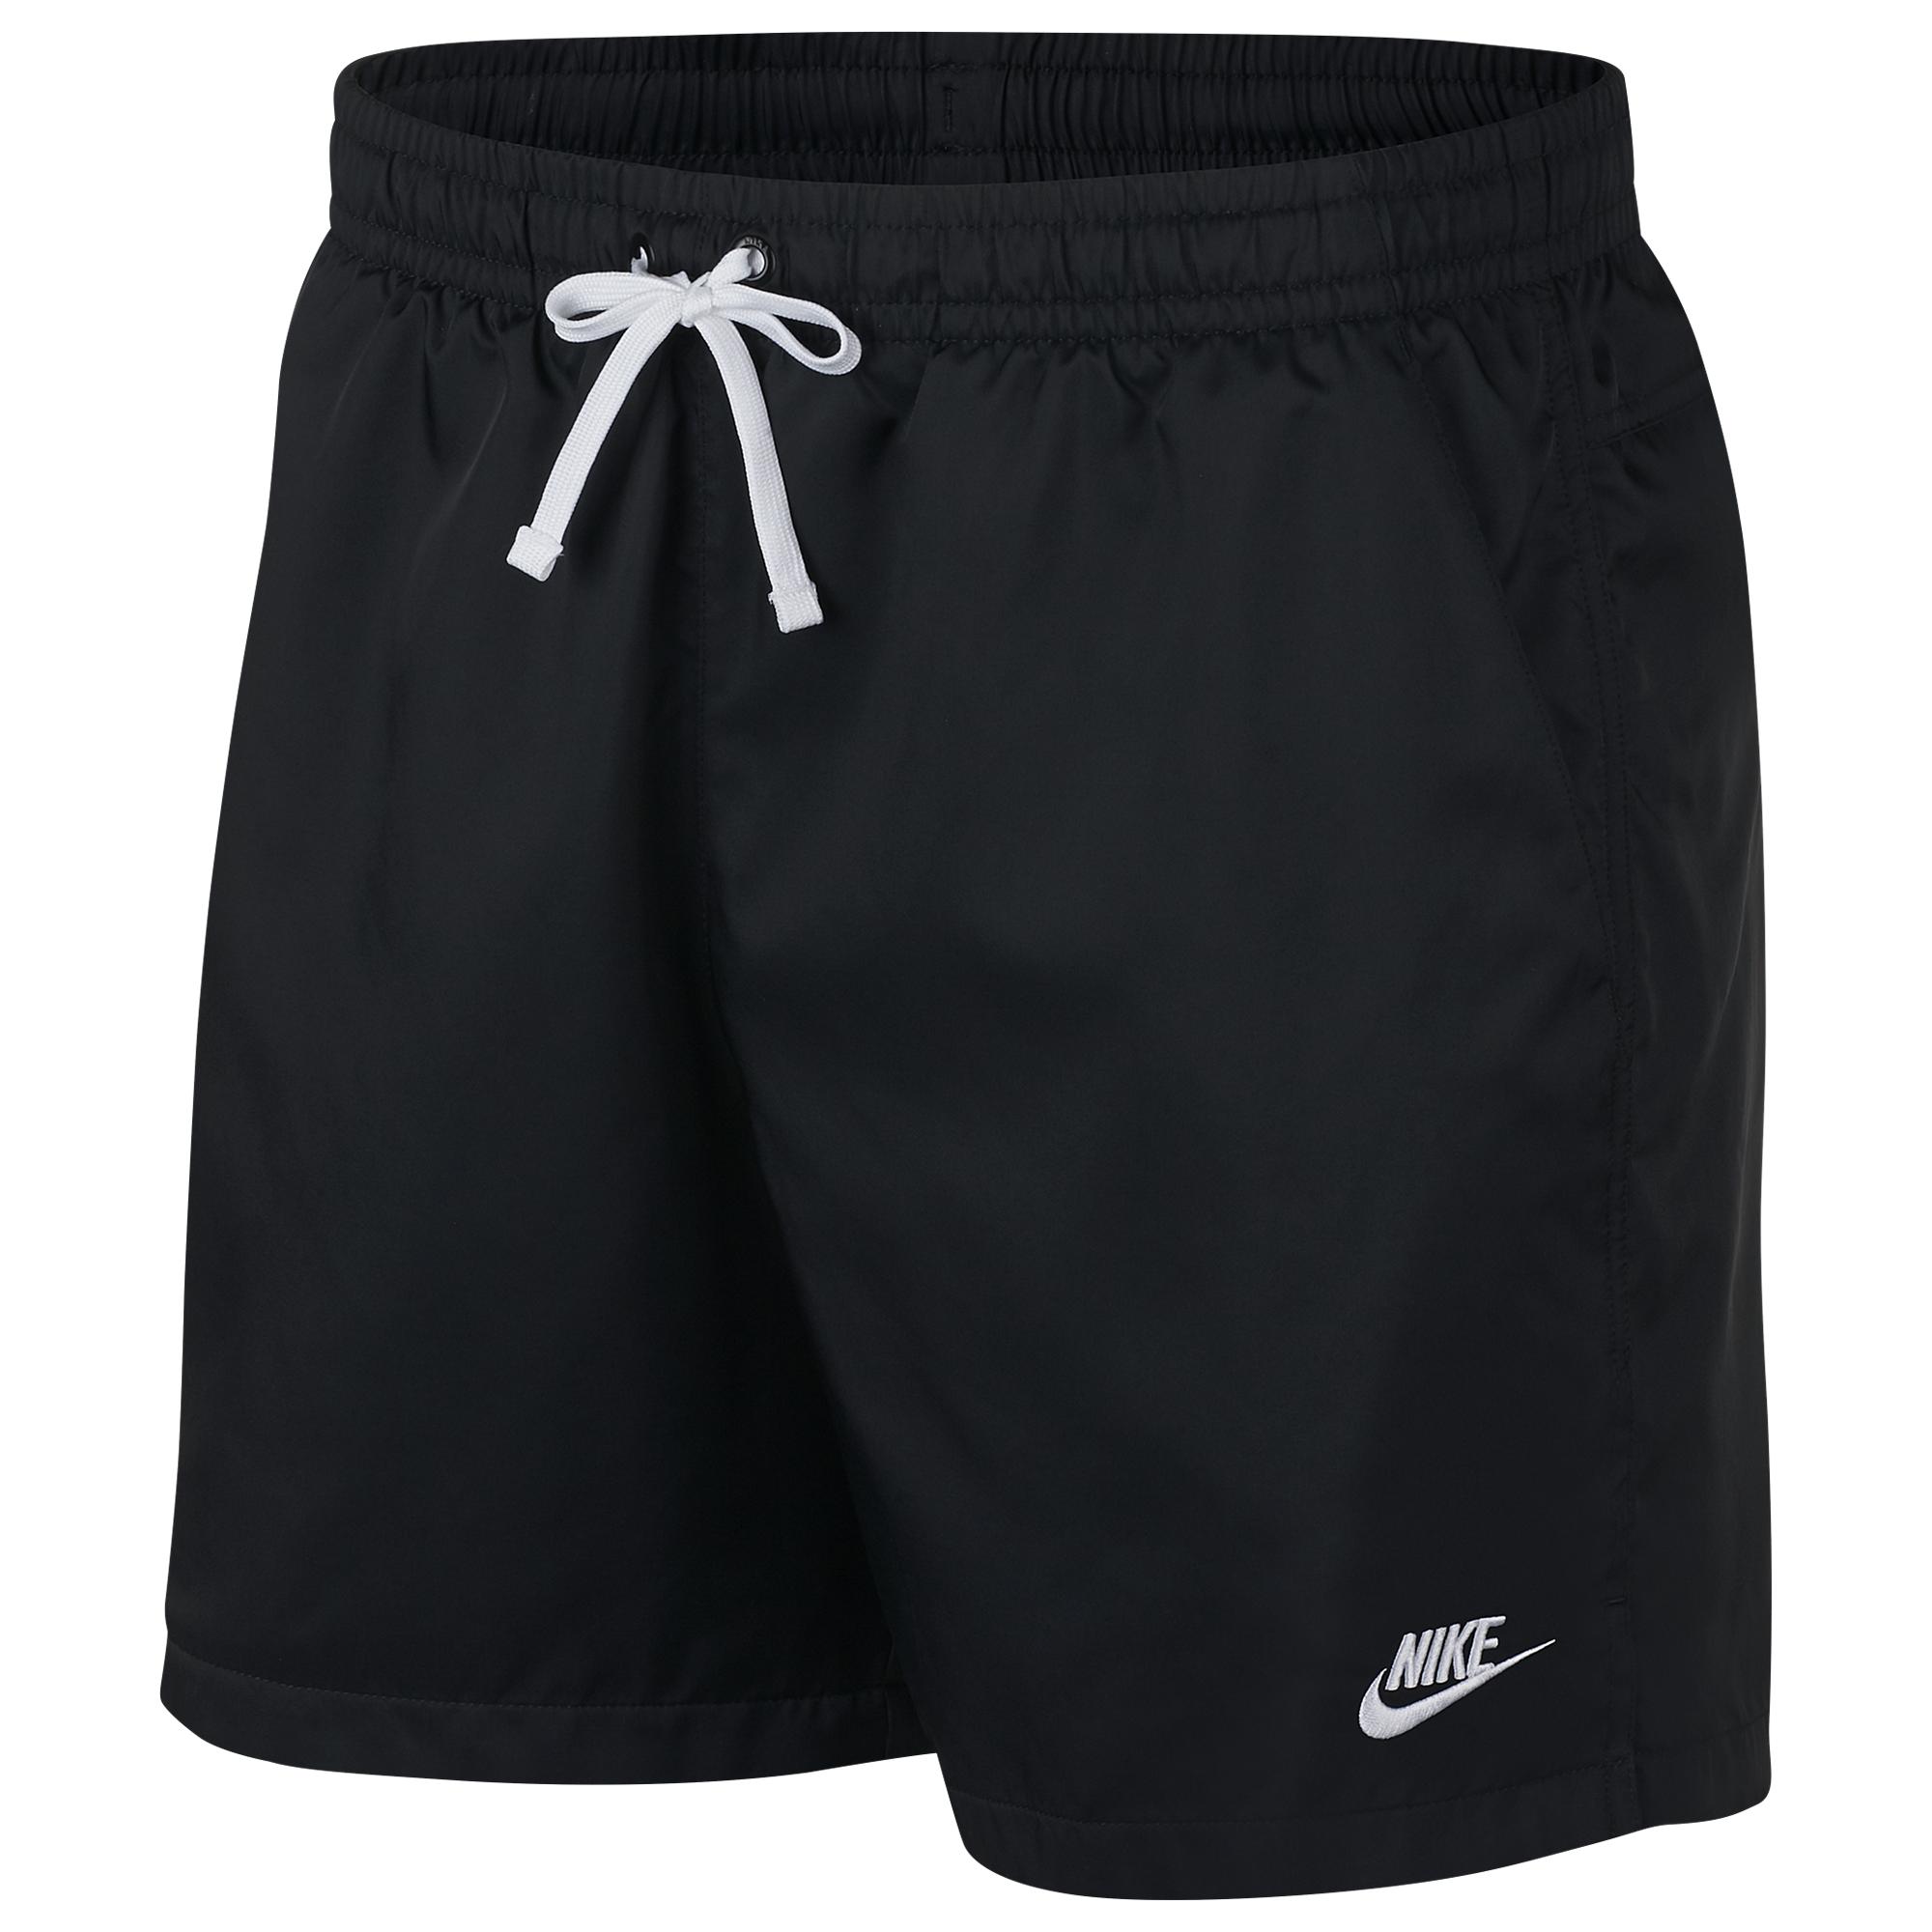 Nike Synthetic Club Essentials Woven Flow Shorts in Black/White (Black ...